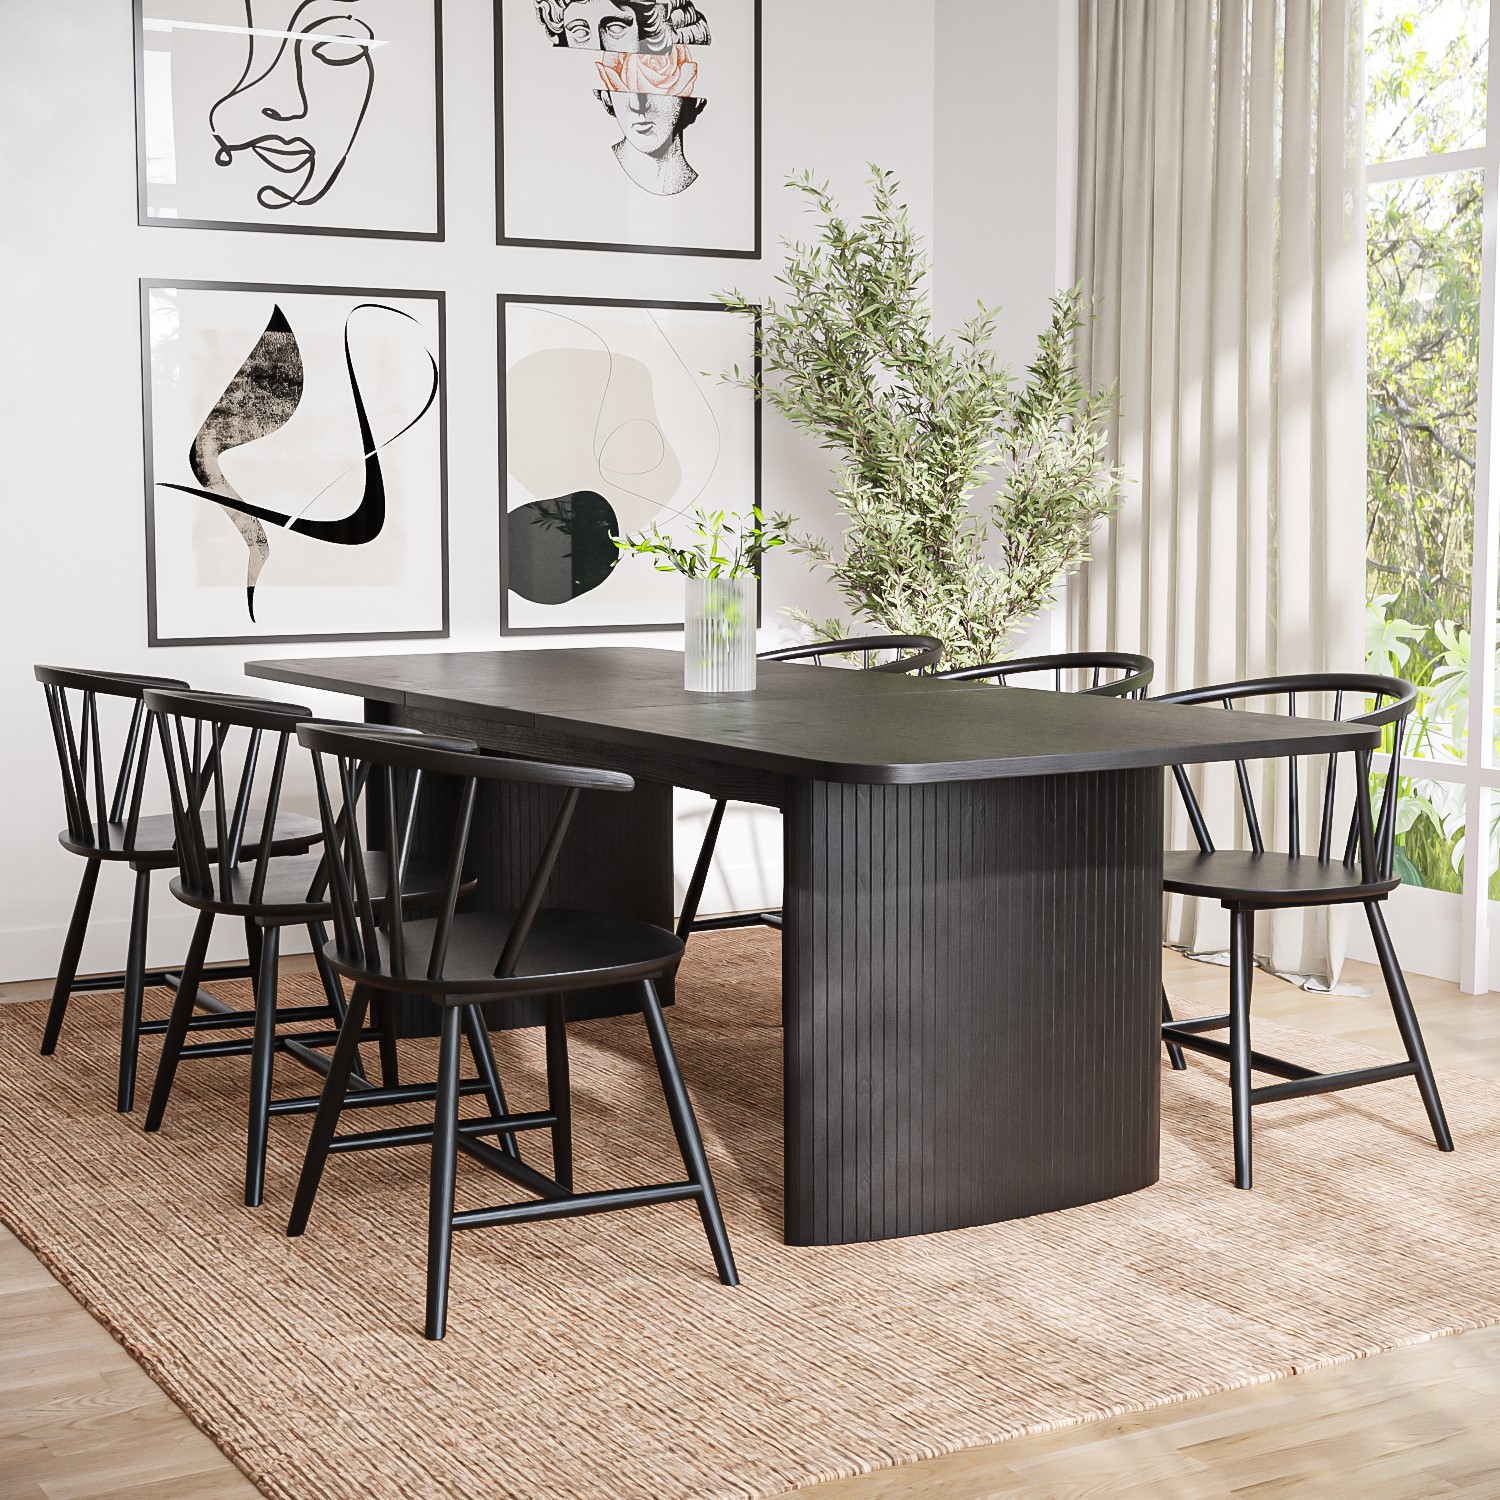 Photo of Extendable black oak dining table with 6 black curved spindle chairs - jarel